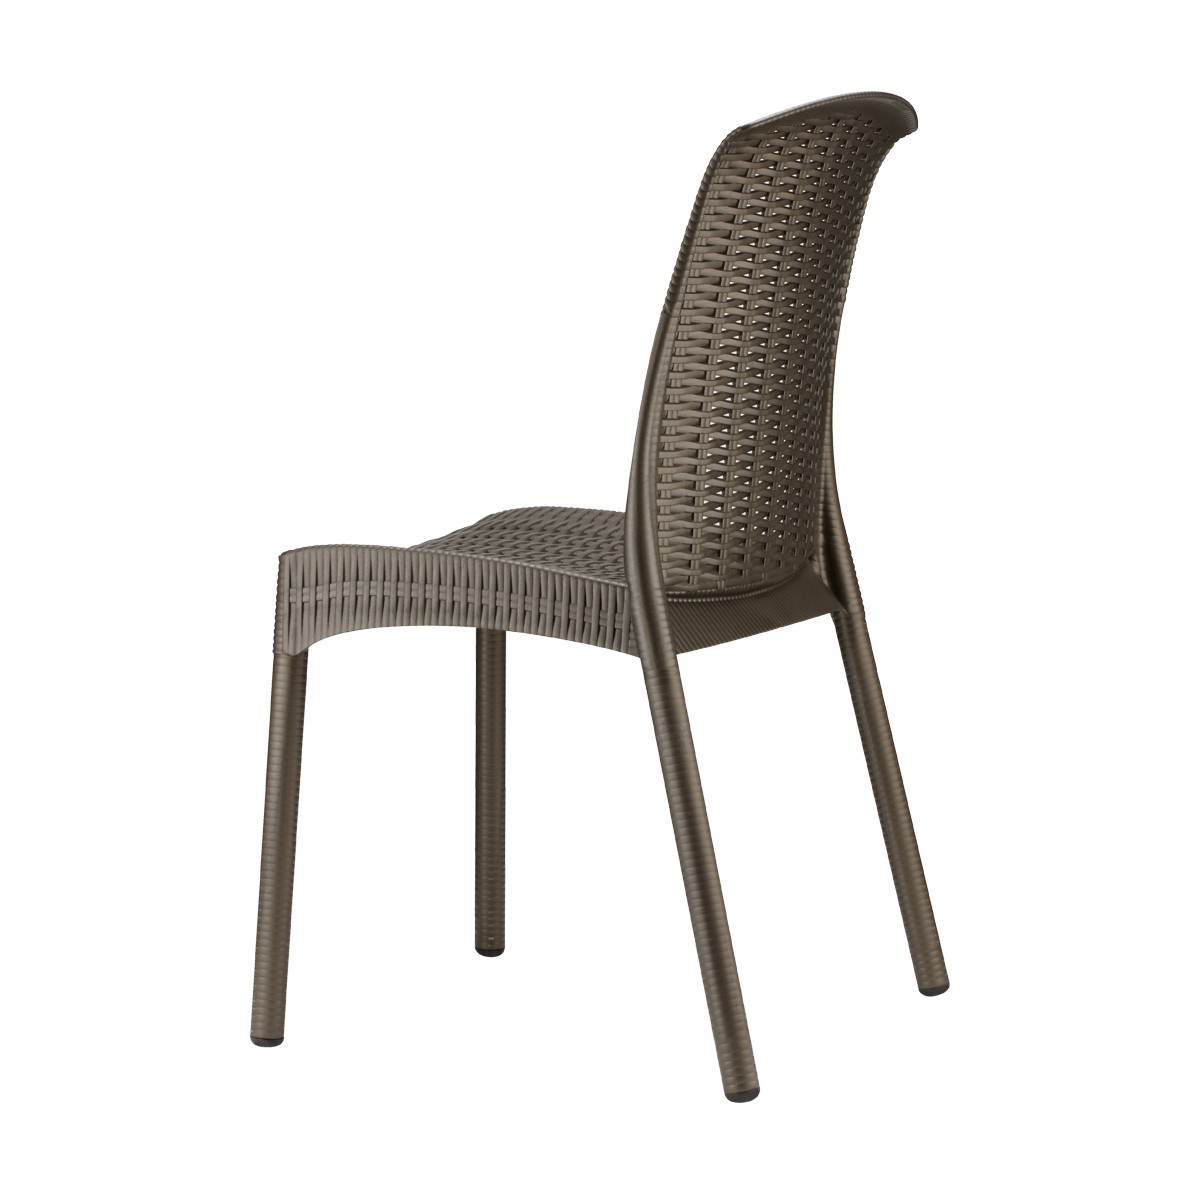 OLIMPIA TREND CHAIR